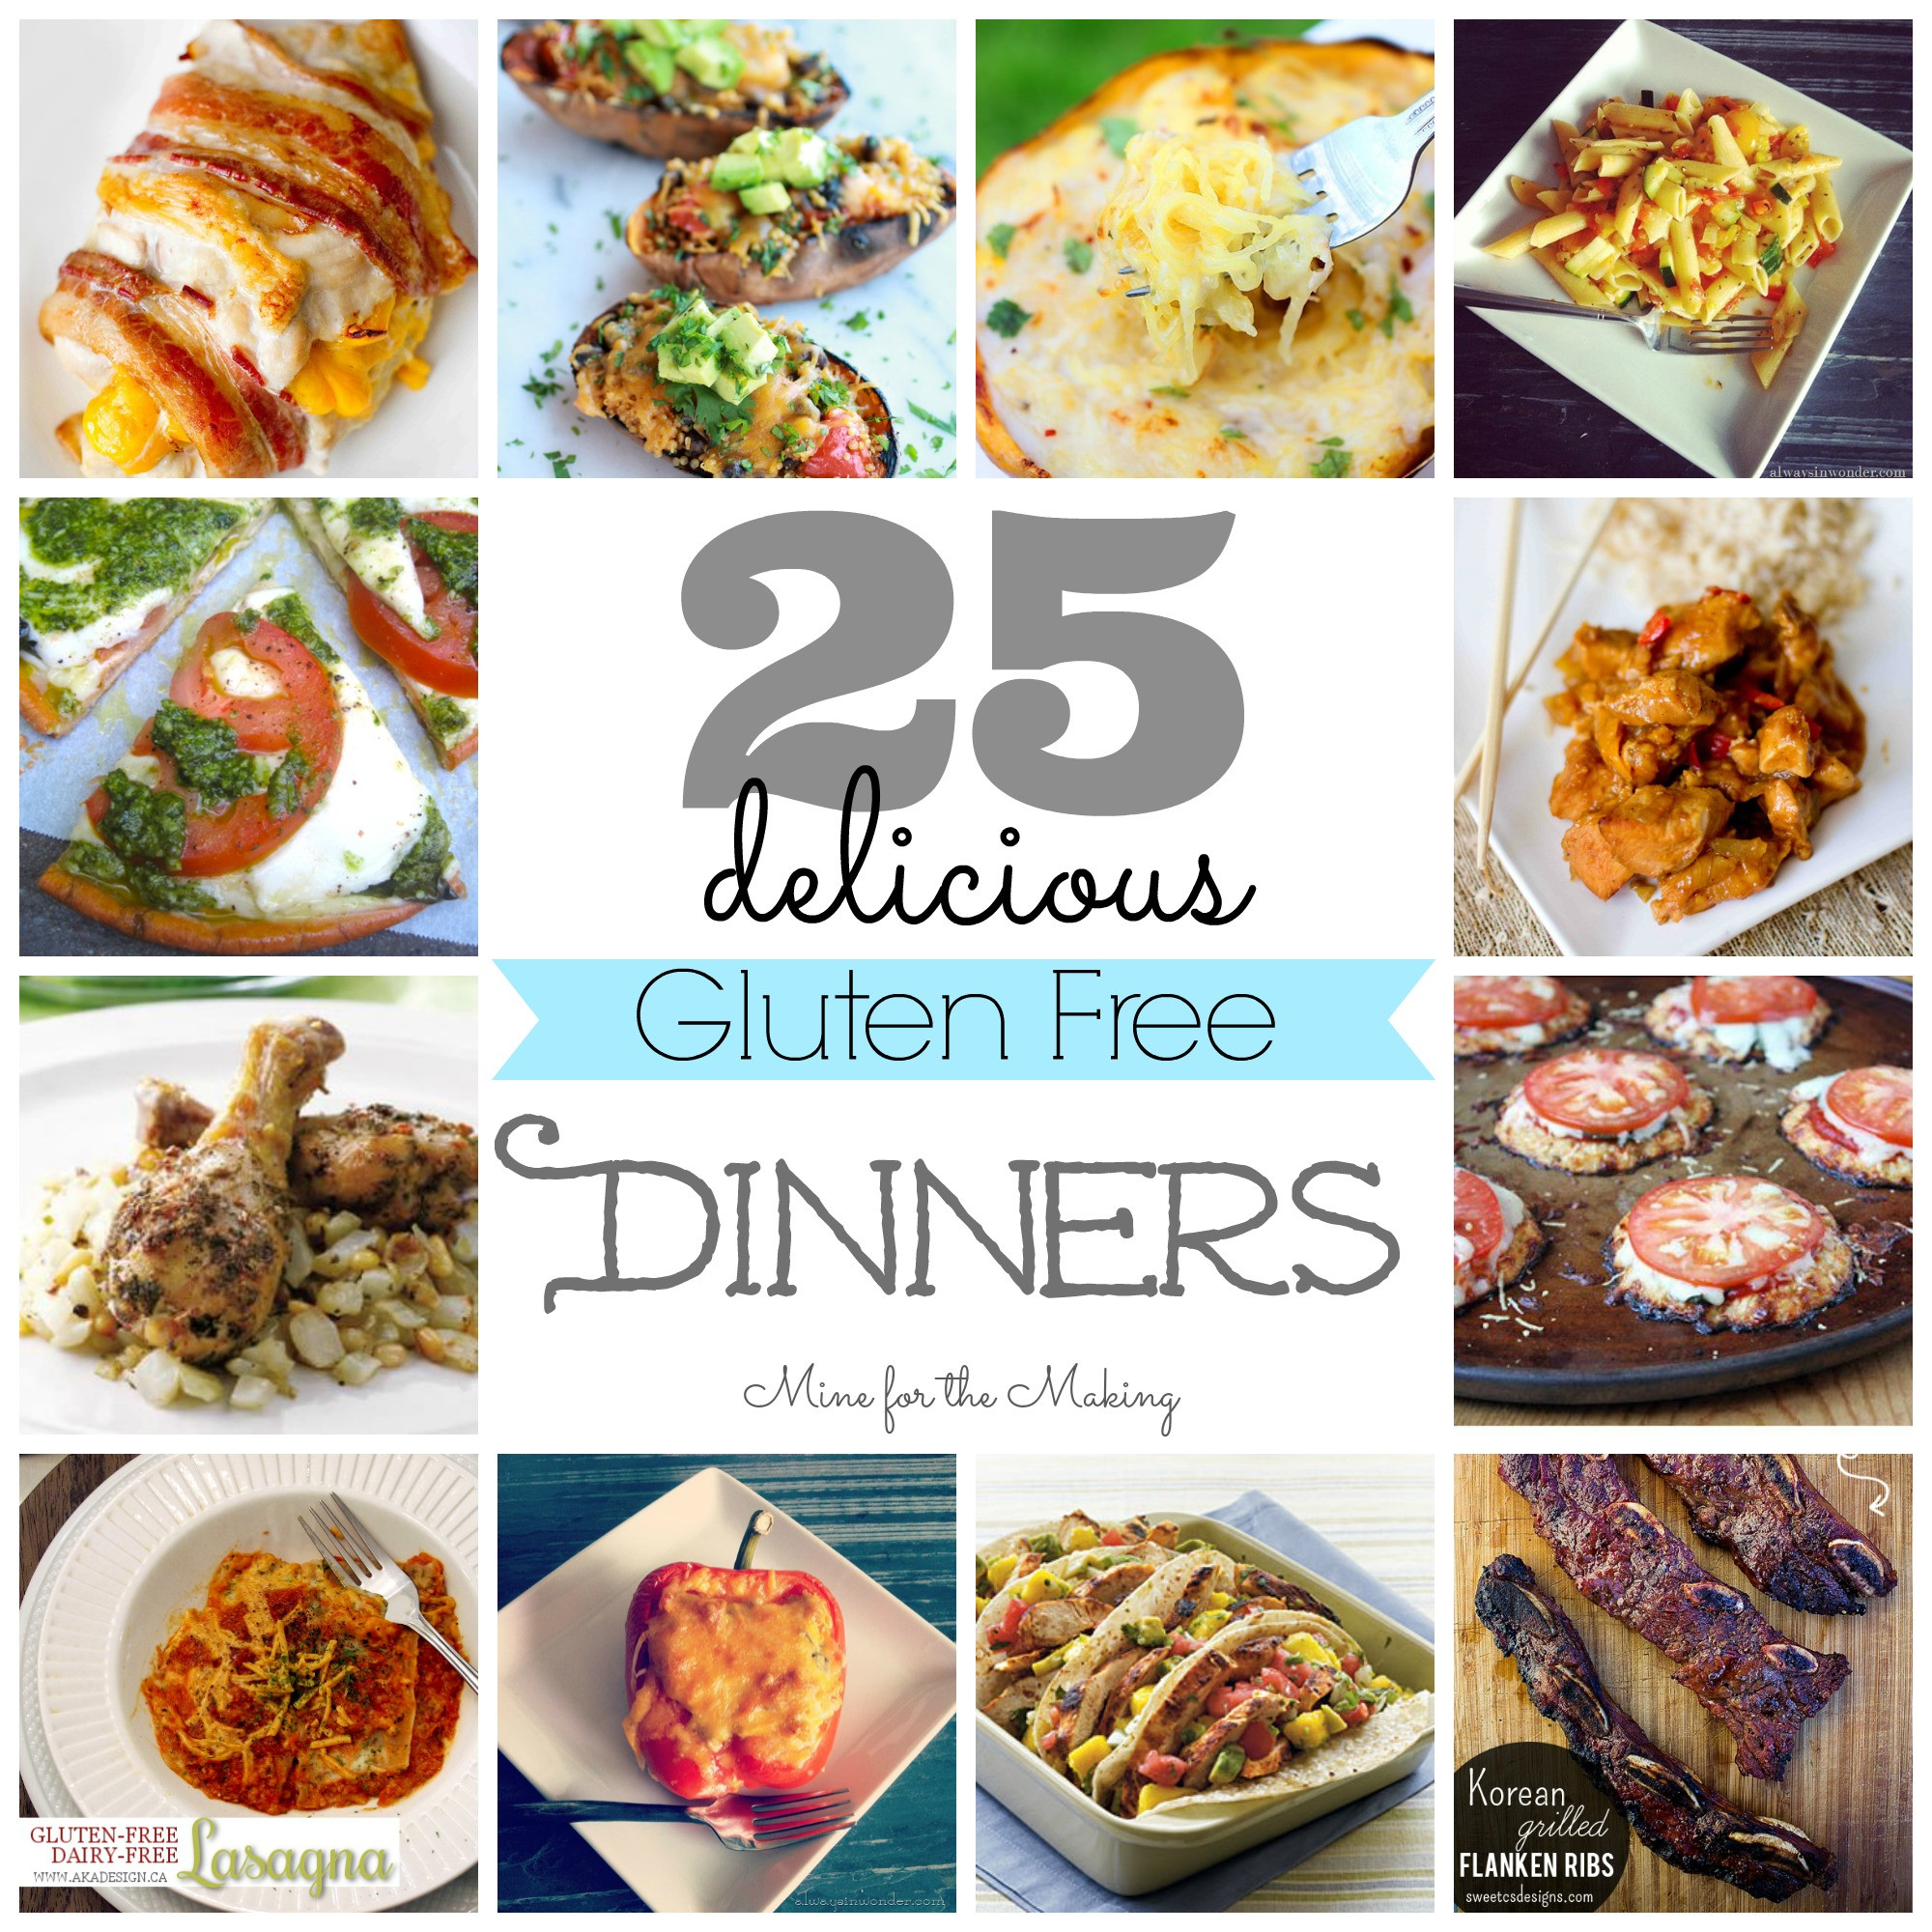 Gluten And Dairy Free Dinners
 Food a licious Friday 25 Delicious Gluten Free Dinners